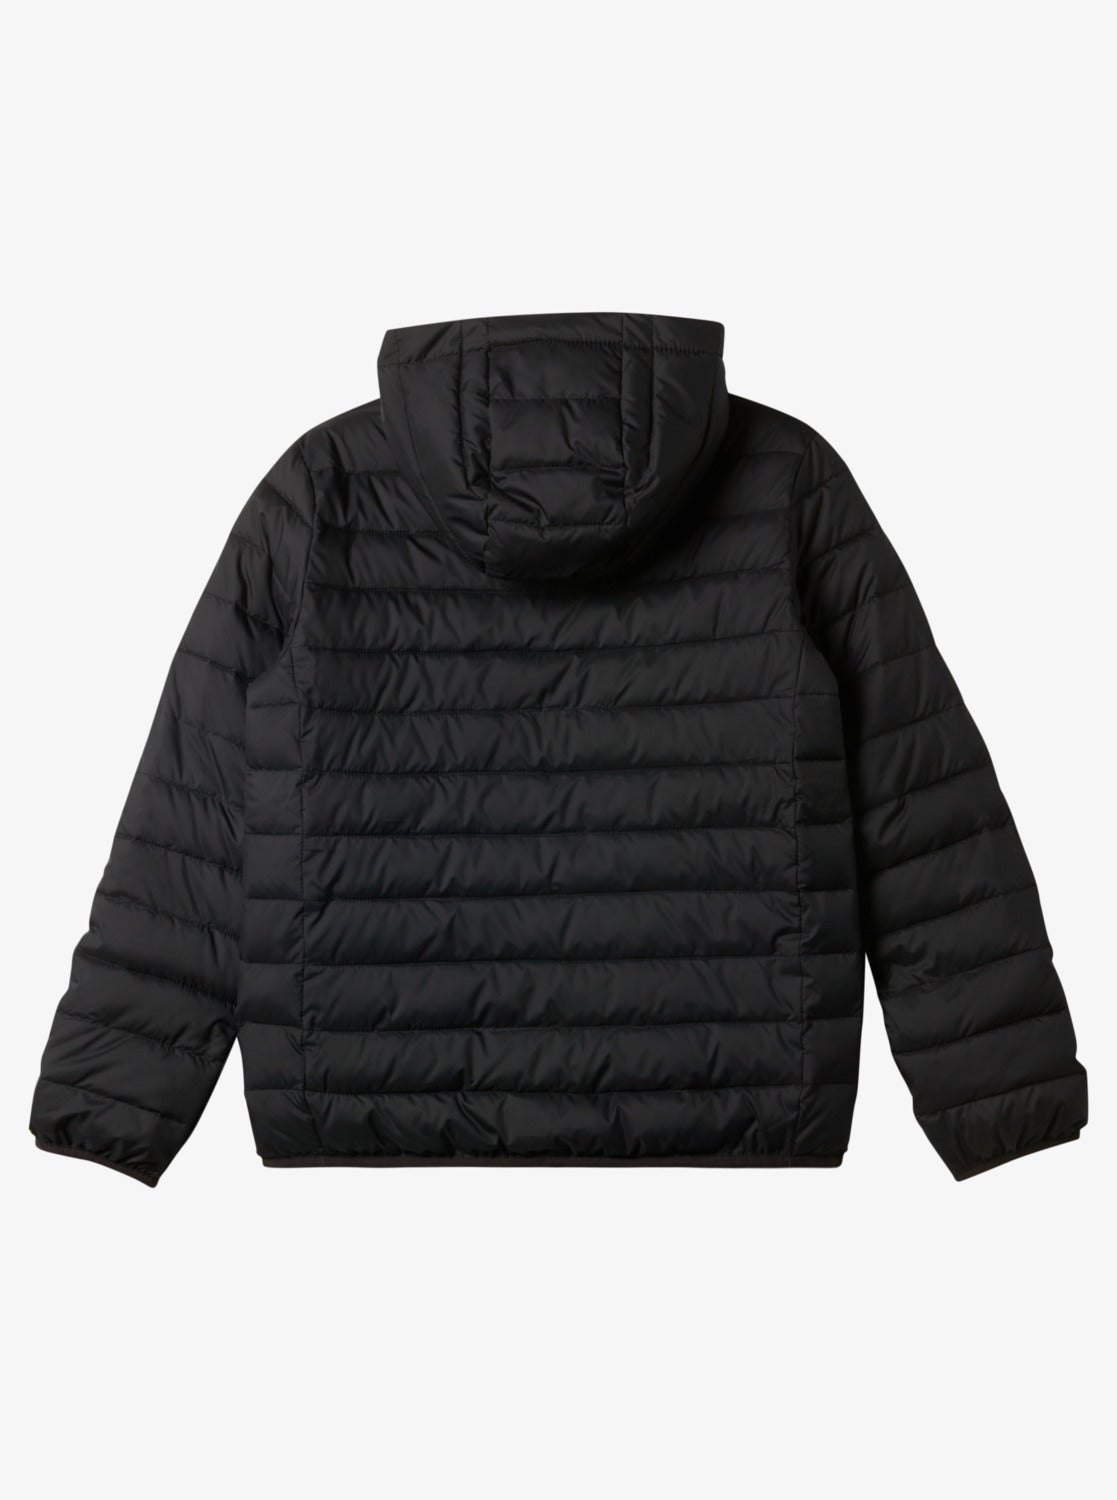 Quiksilver Scaly Youth Jacket  Black Colourway black